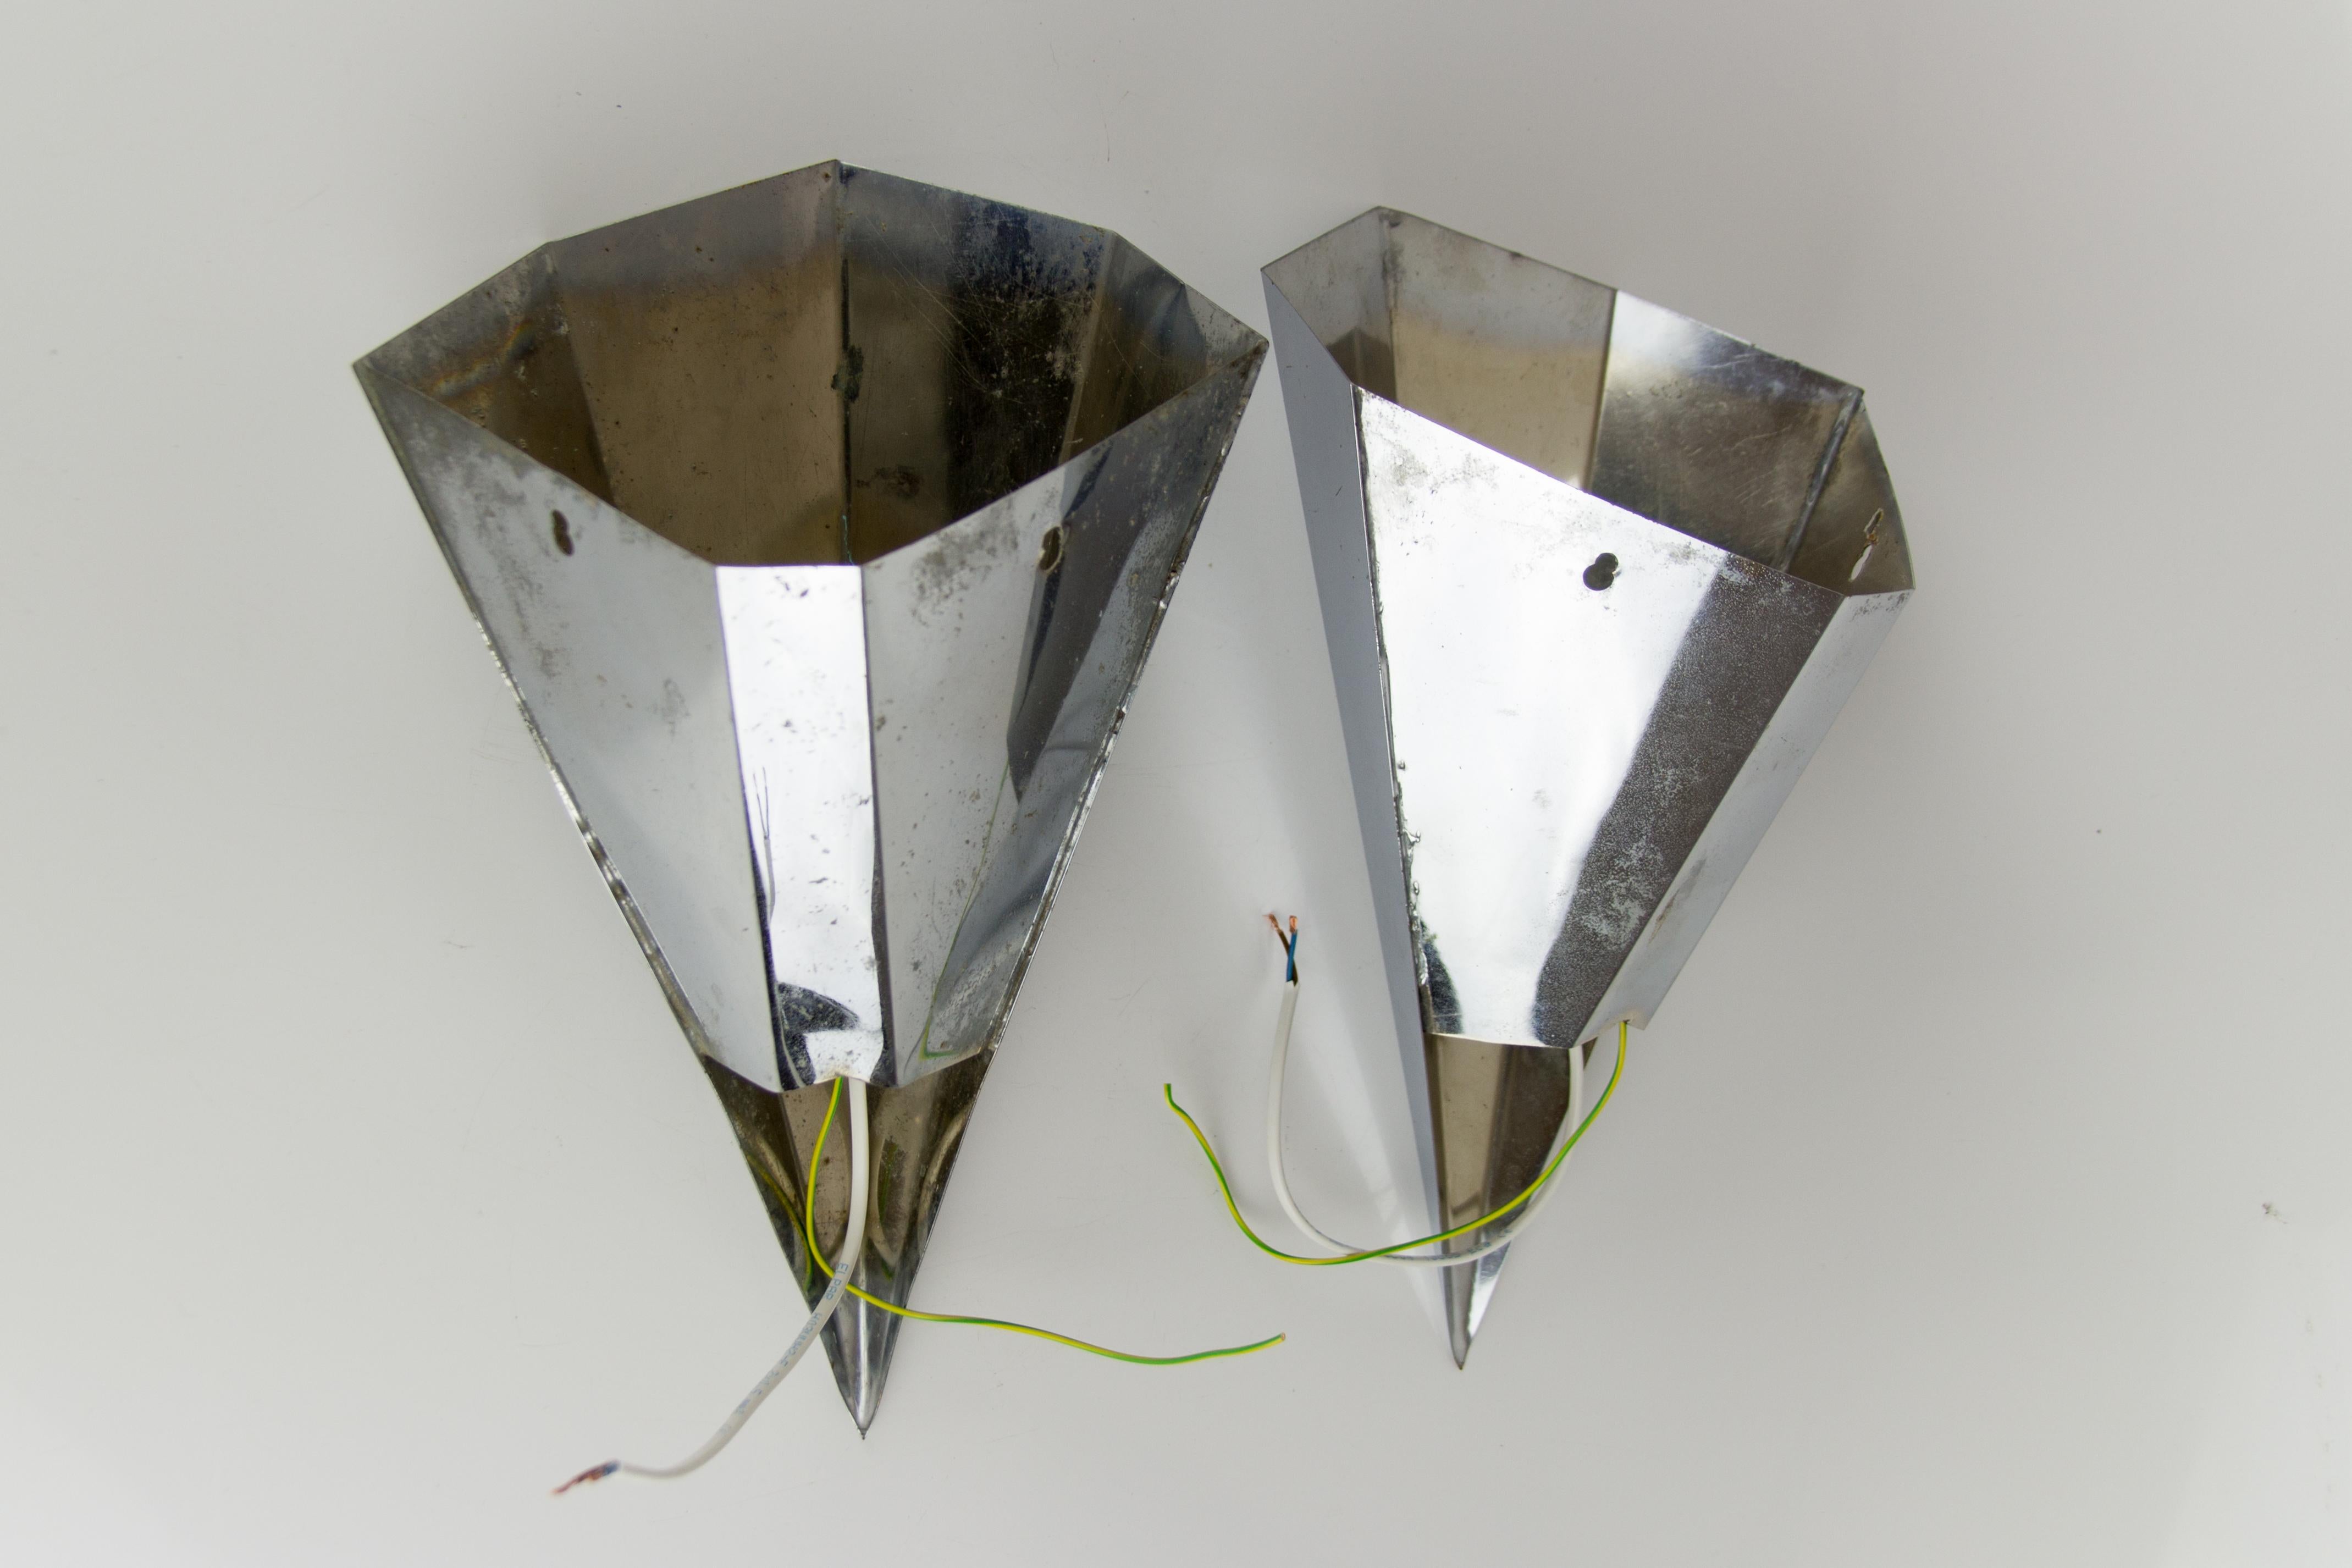 Pair of Art Deco Nickel-Plated Metal Prism Corner Wall Sconces, France, 1920s For Sale 6